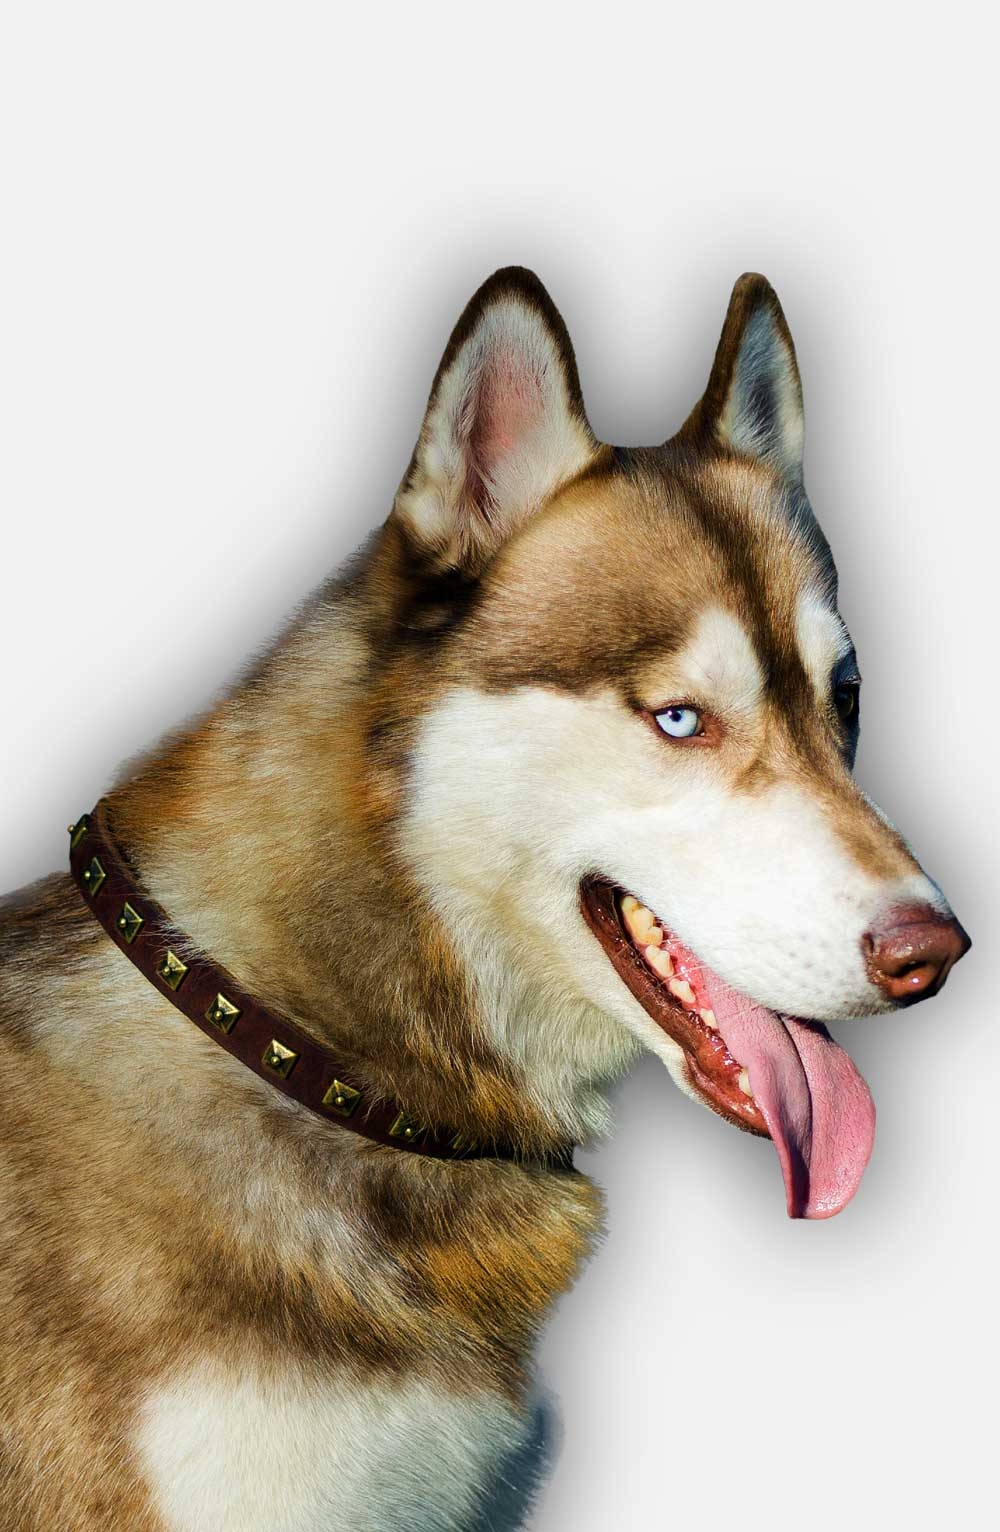 Get Designer Dog Collar with Square Brass Studs for Walking